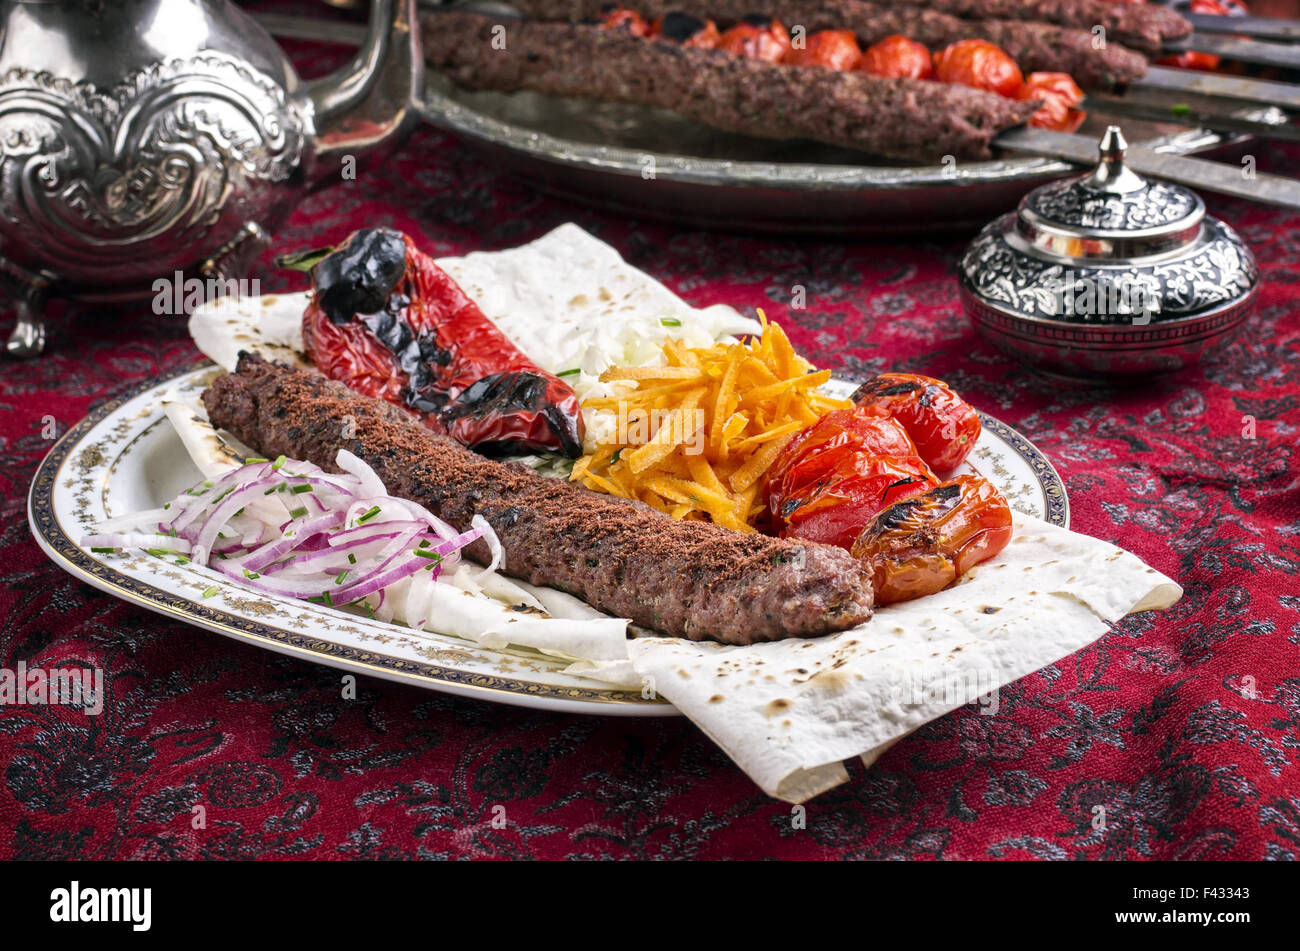 grilled adana kebab with vegetables Stock Photo